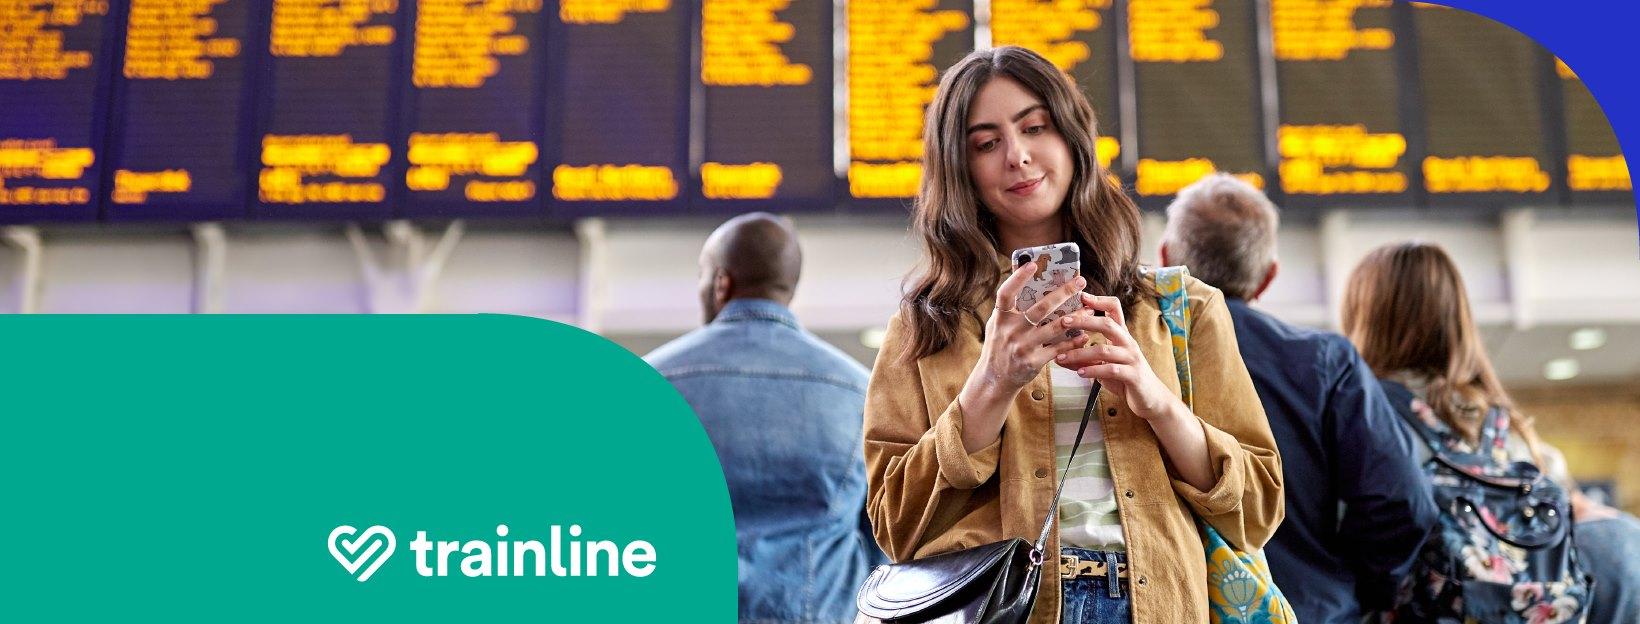 Save up to 35% on Tickets with Trainline